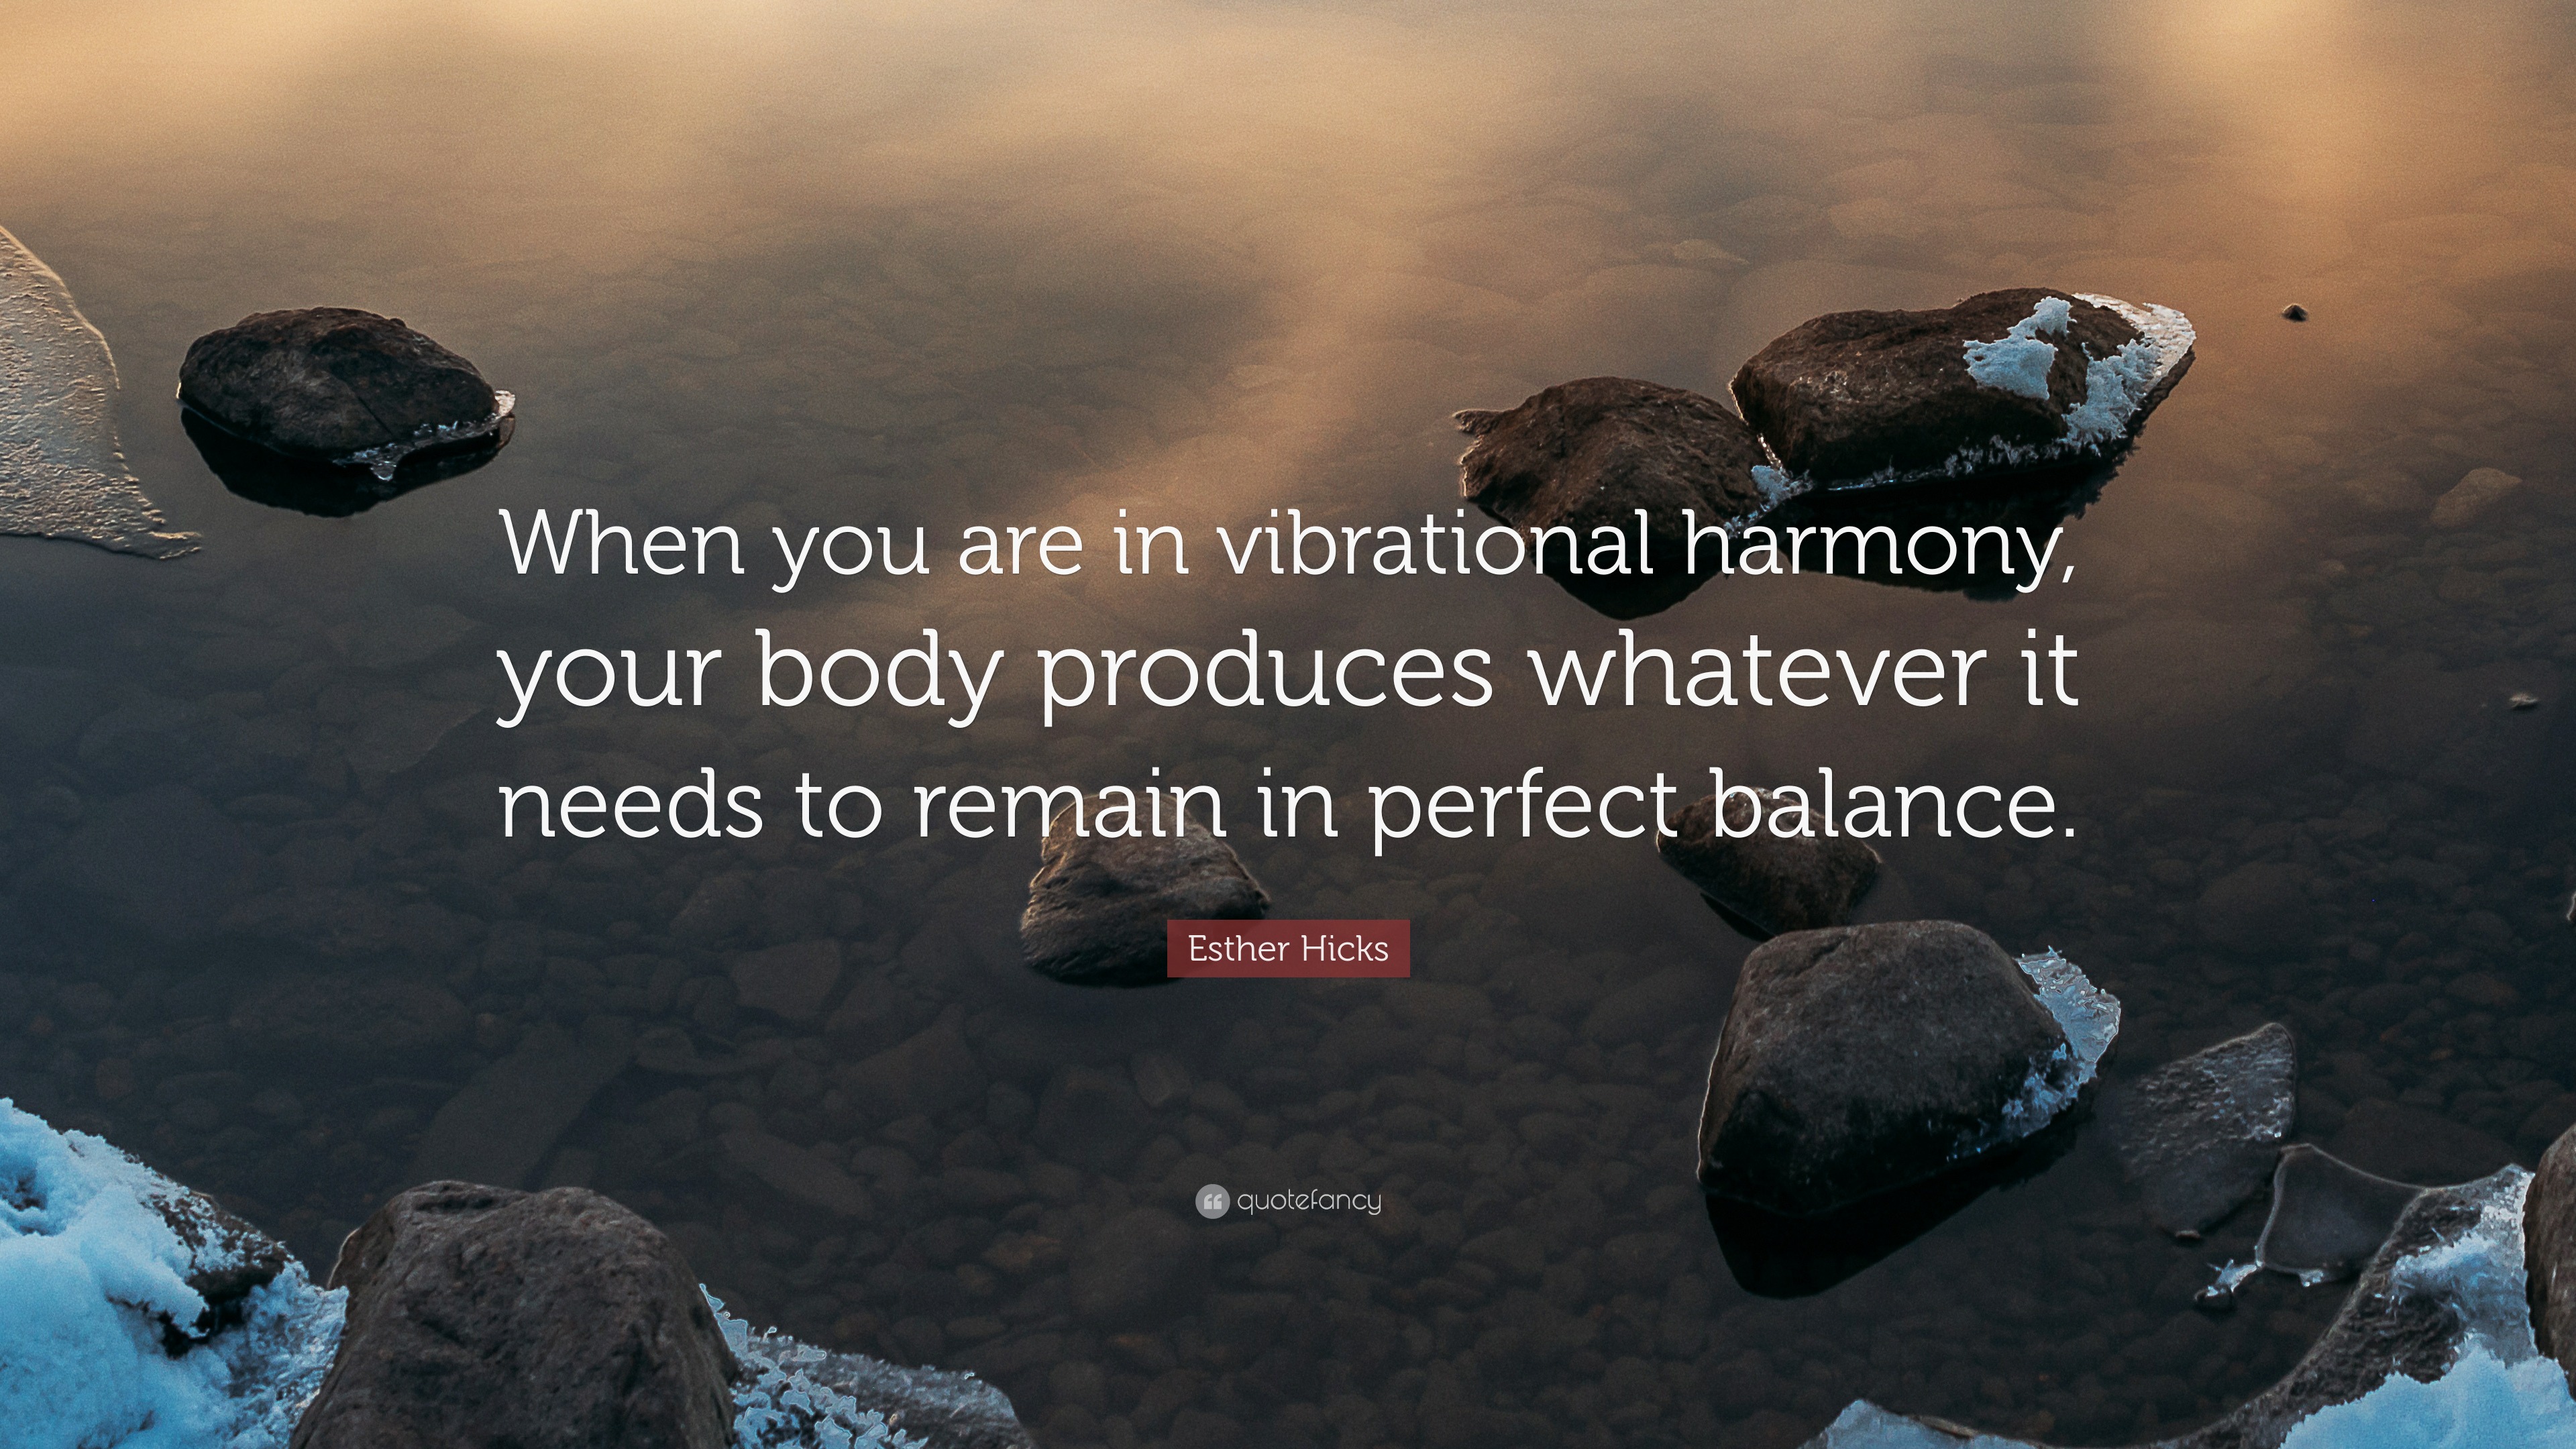 Esther Hicks Quote: “When you are in vibrational harmony, your body  produces whatever it needs to